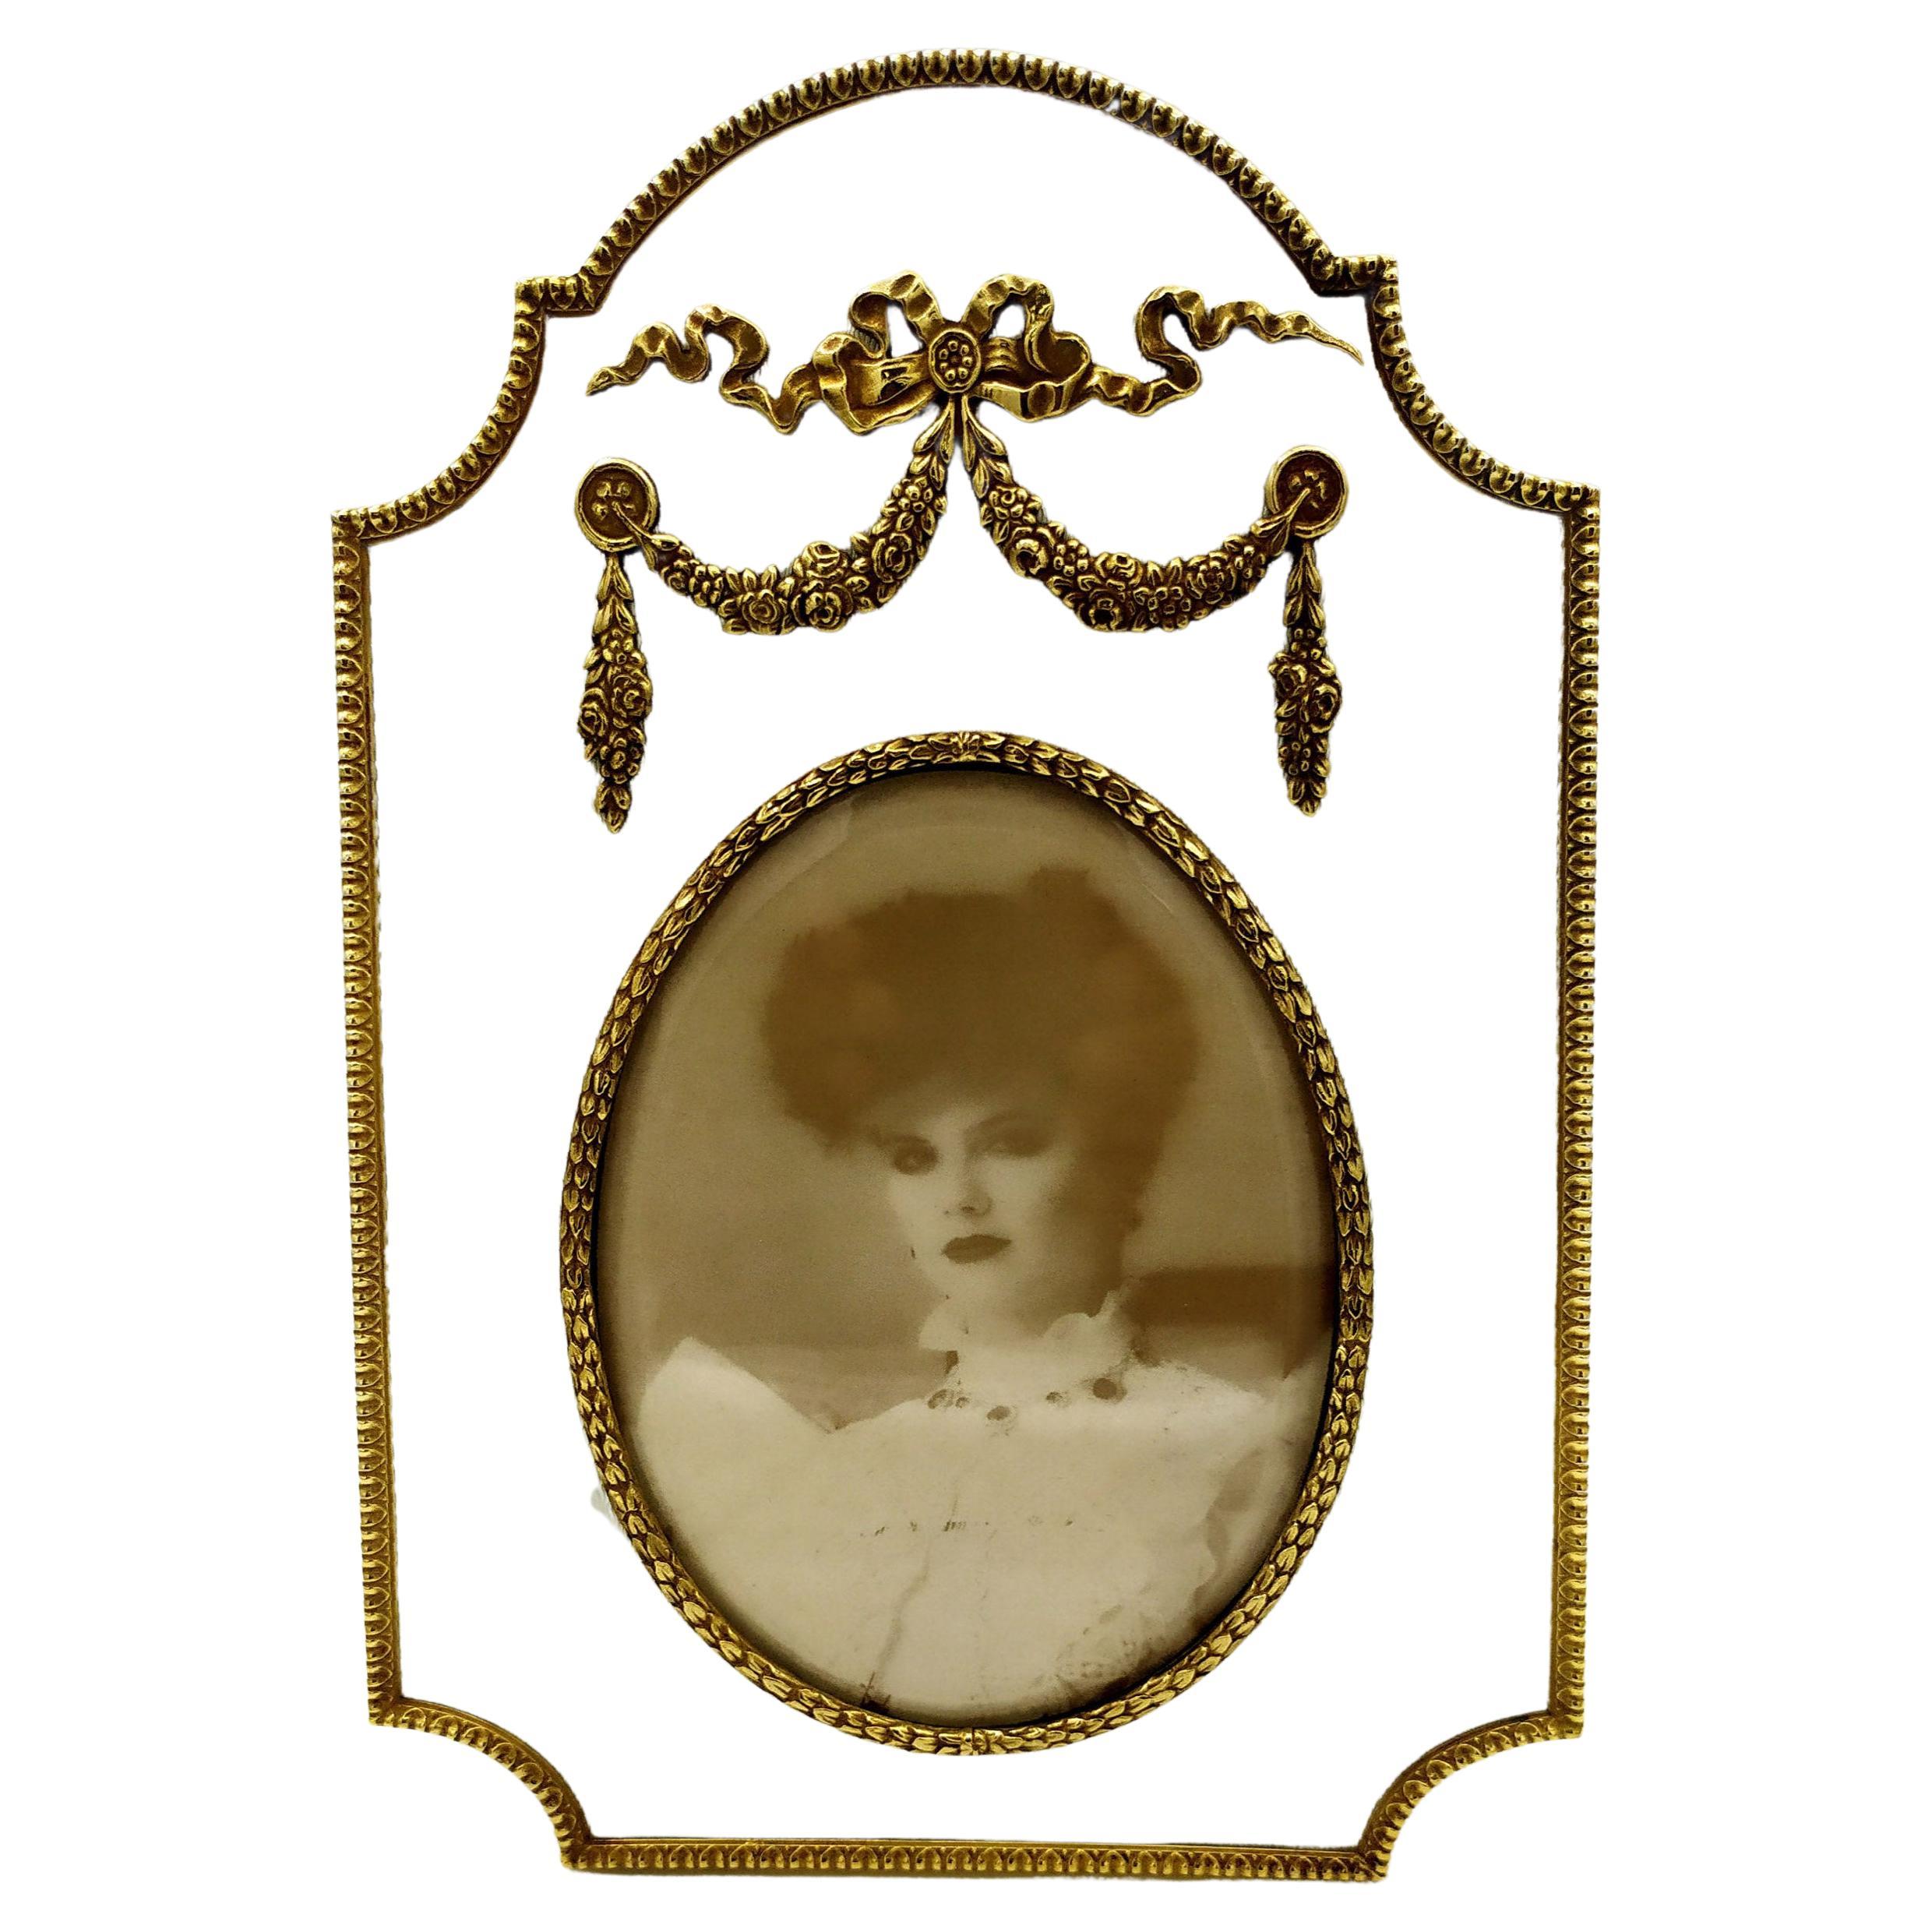 Photograph Frame Large Imperial Style White Enamel on Sterling Silver Salimbeni For Sale